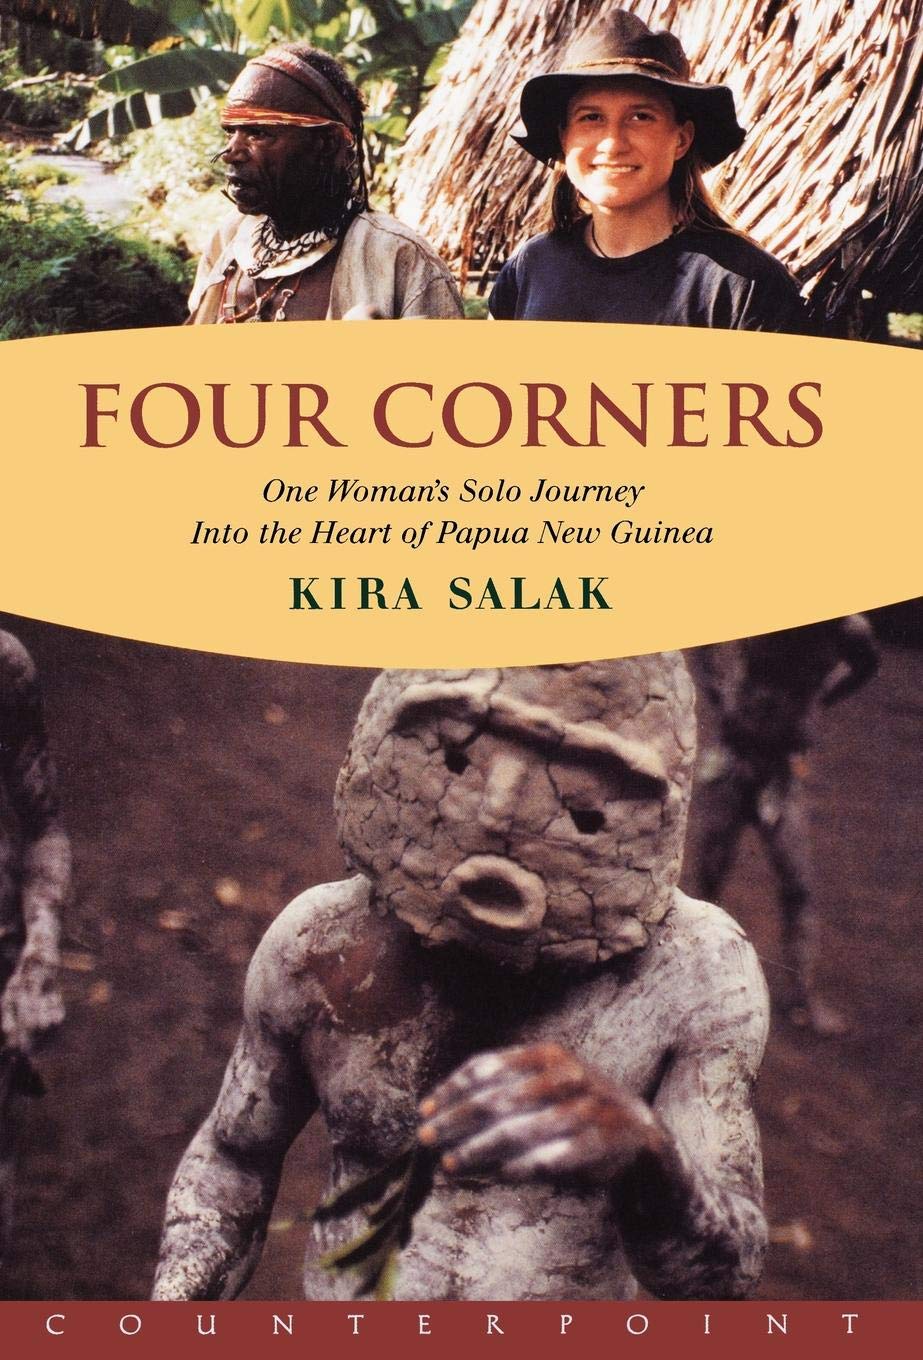 Four Corners: One Woman's Solo Journey Into the Heart of Papua New Guinea